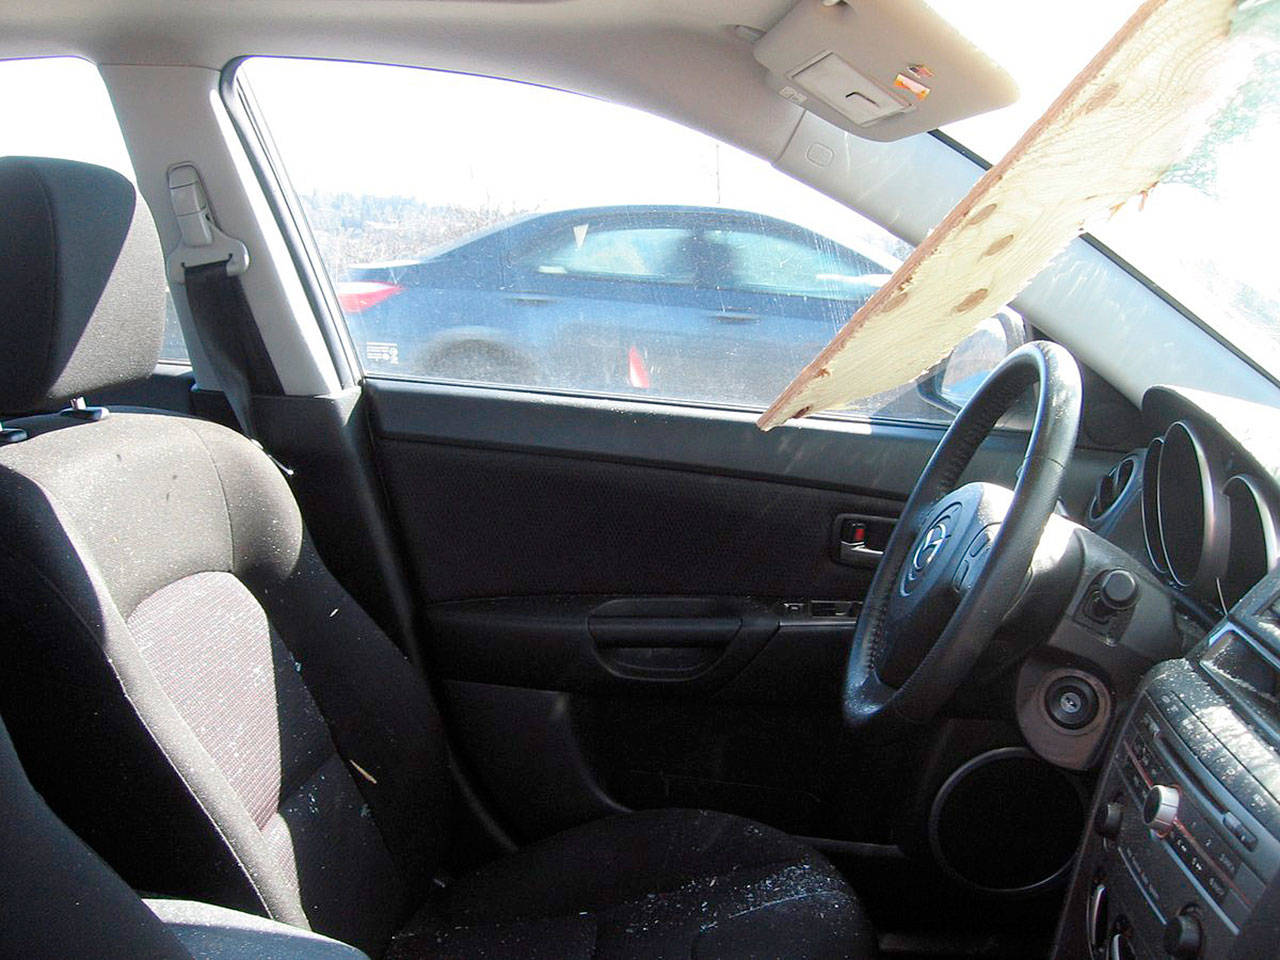 A driver suffered only minor scratches from glass splinters after a piece of lumber from an unsecured load went through the vehicle’s windshield around noon Tuesday along Highway 167 southbound in Kent near the 84th Avenue South exit. The driver of the vehicle that lost the lumber did not stop. COURTESY PHOTO, State Patrol